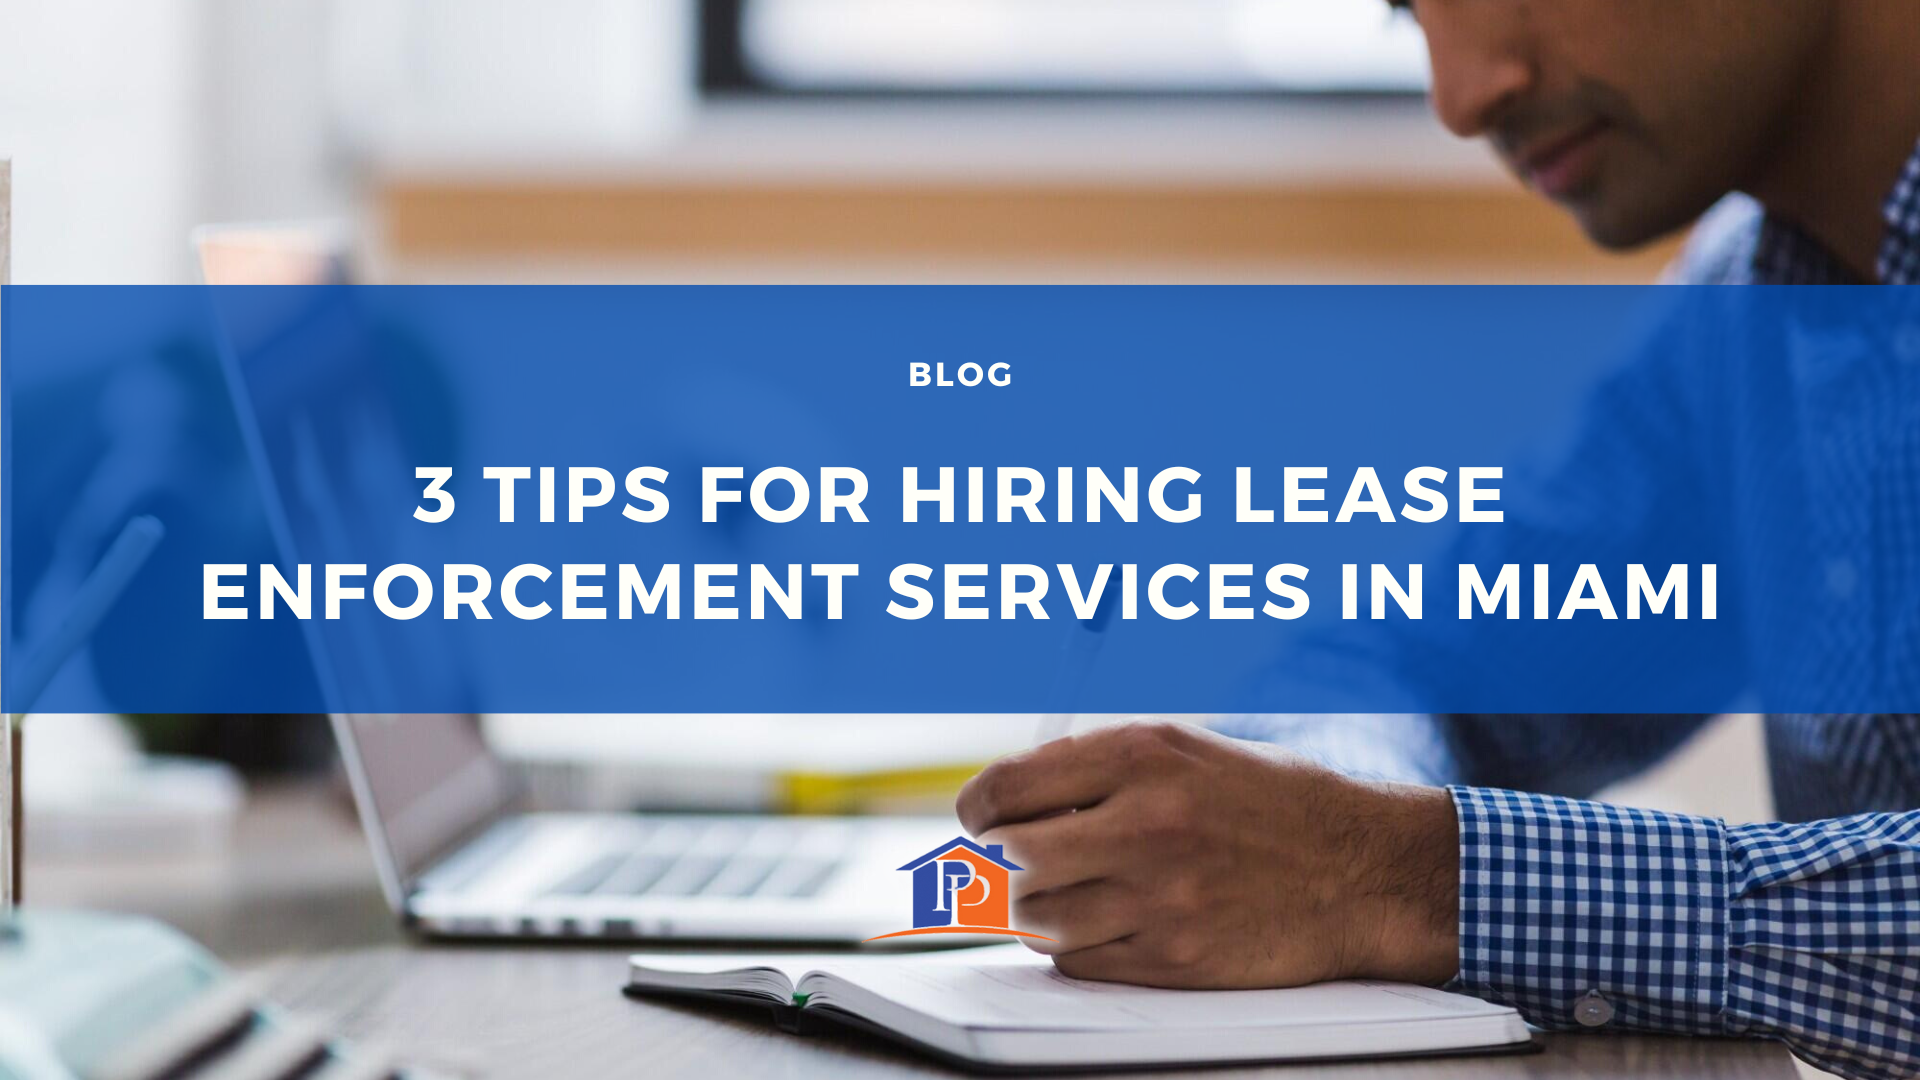 3 Tips for Hiring Lease Enforcement Services in Miami, FL